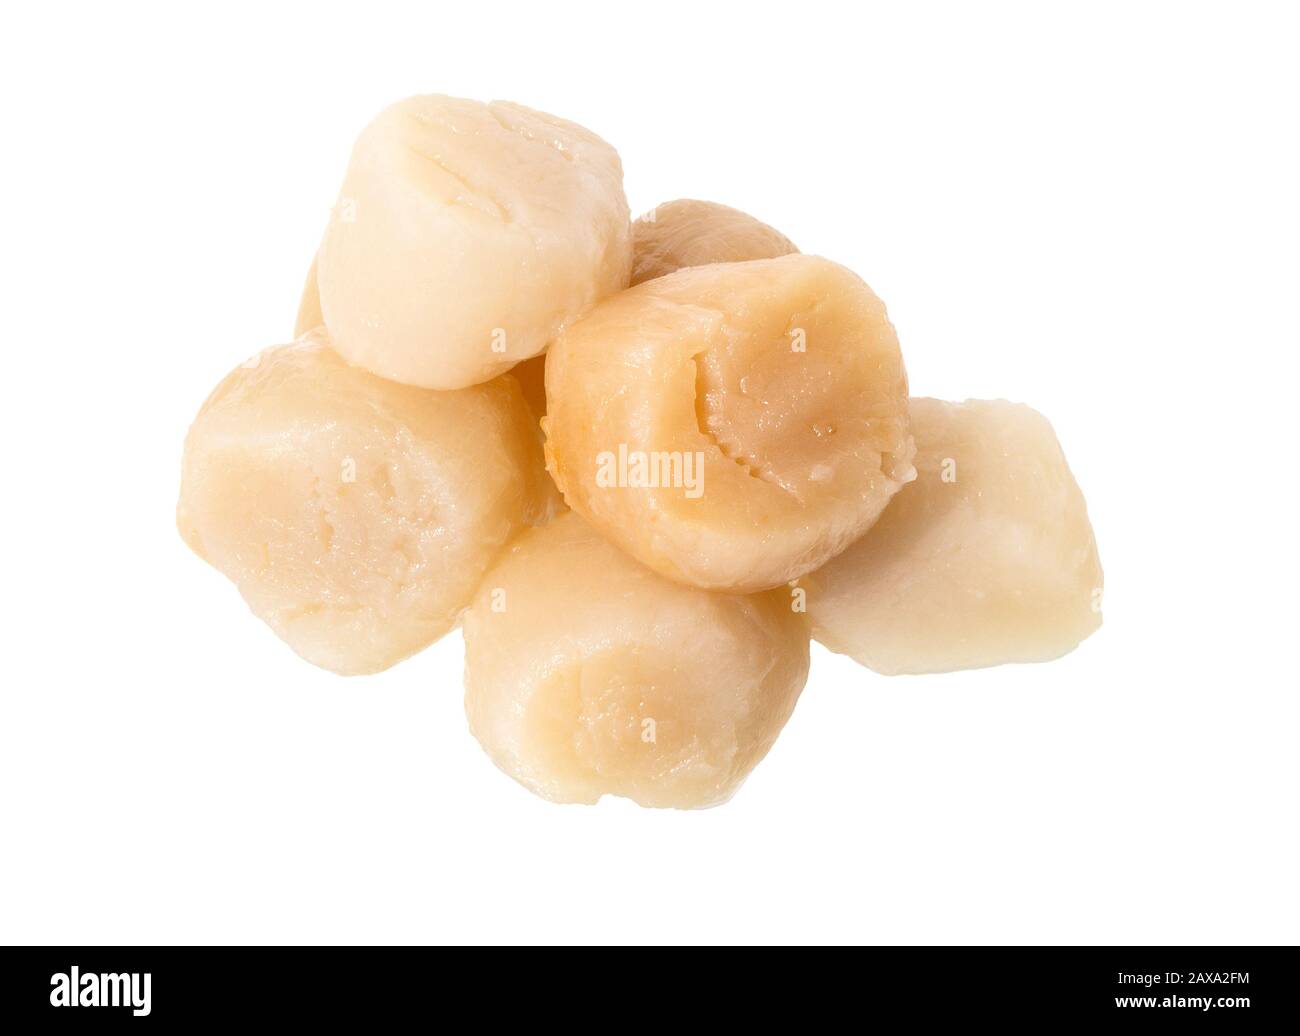 Scallops isolated on white background. Raw fresh scallops adductor. Fresh seafood. Stock Photo